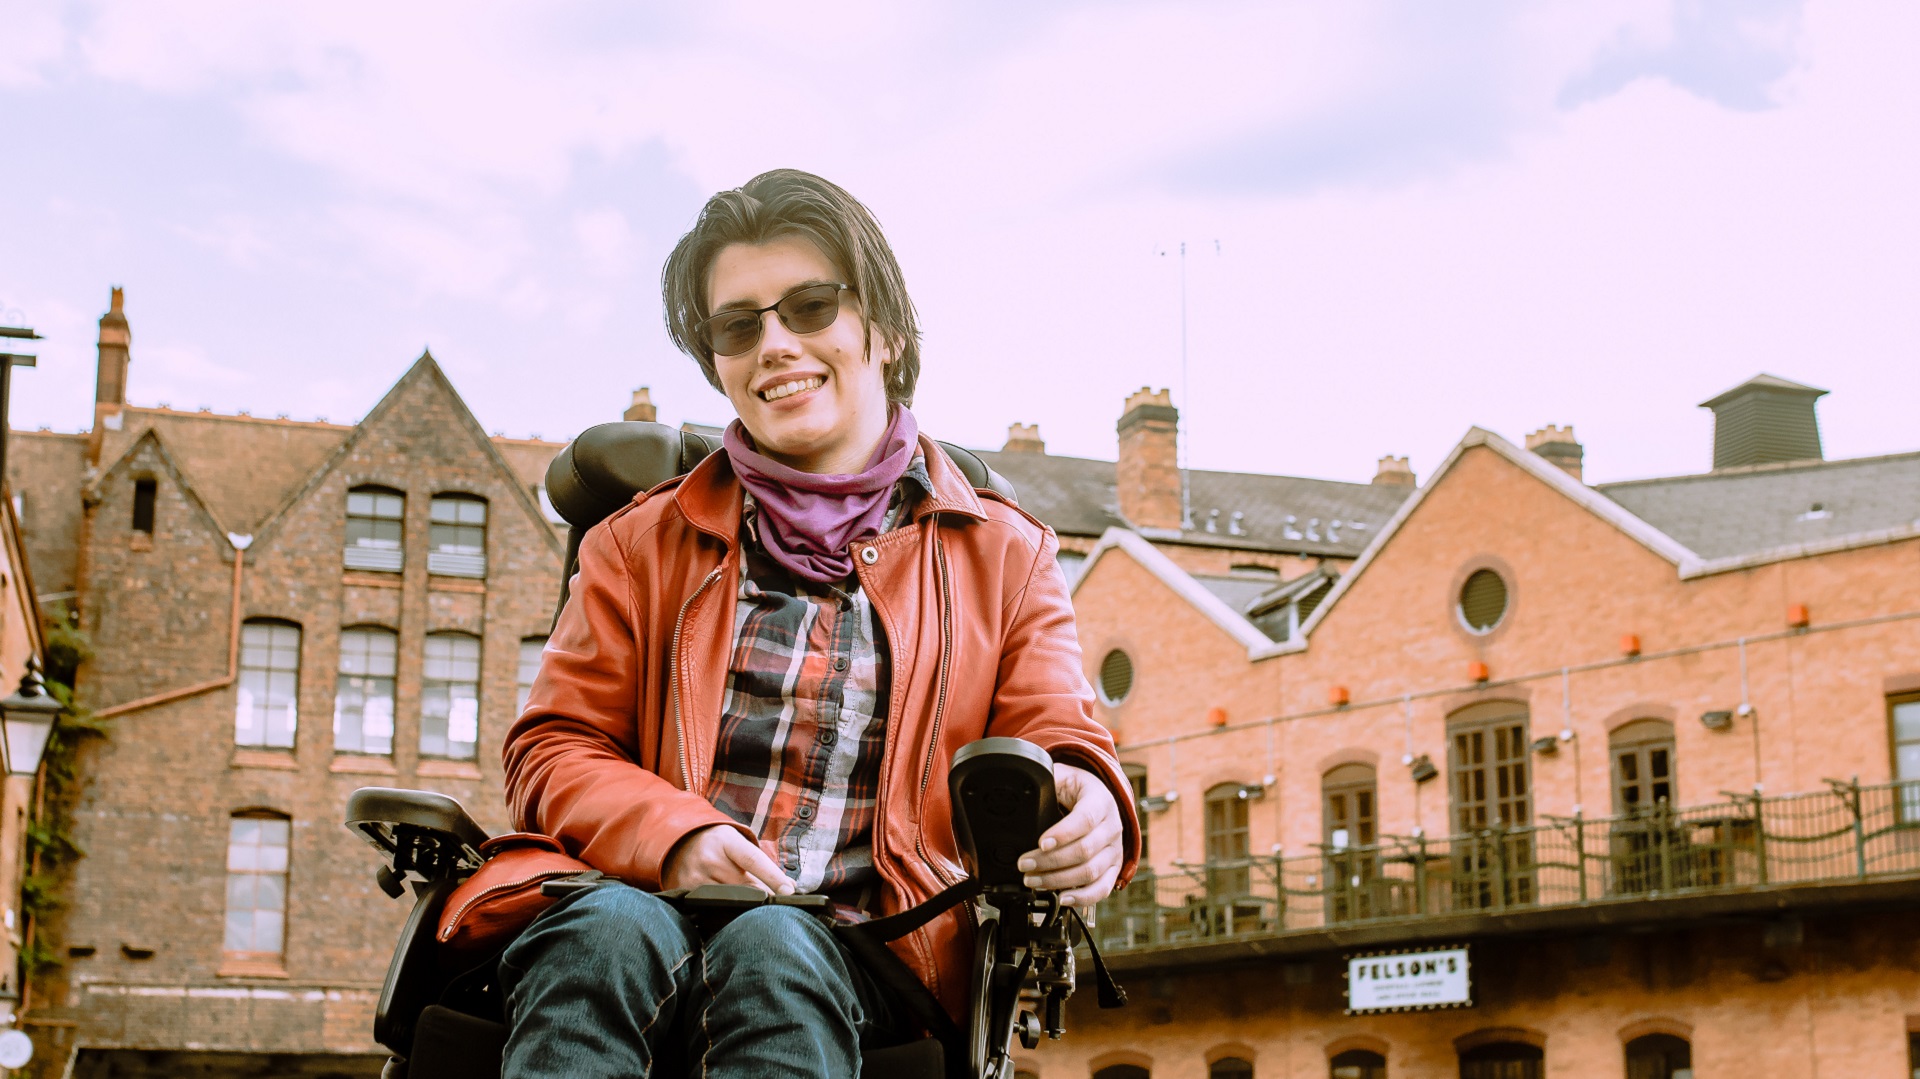 Emma Dobson blogs about jobs for disabled people